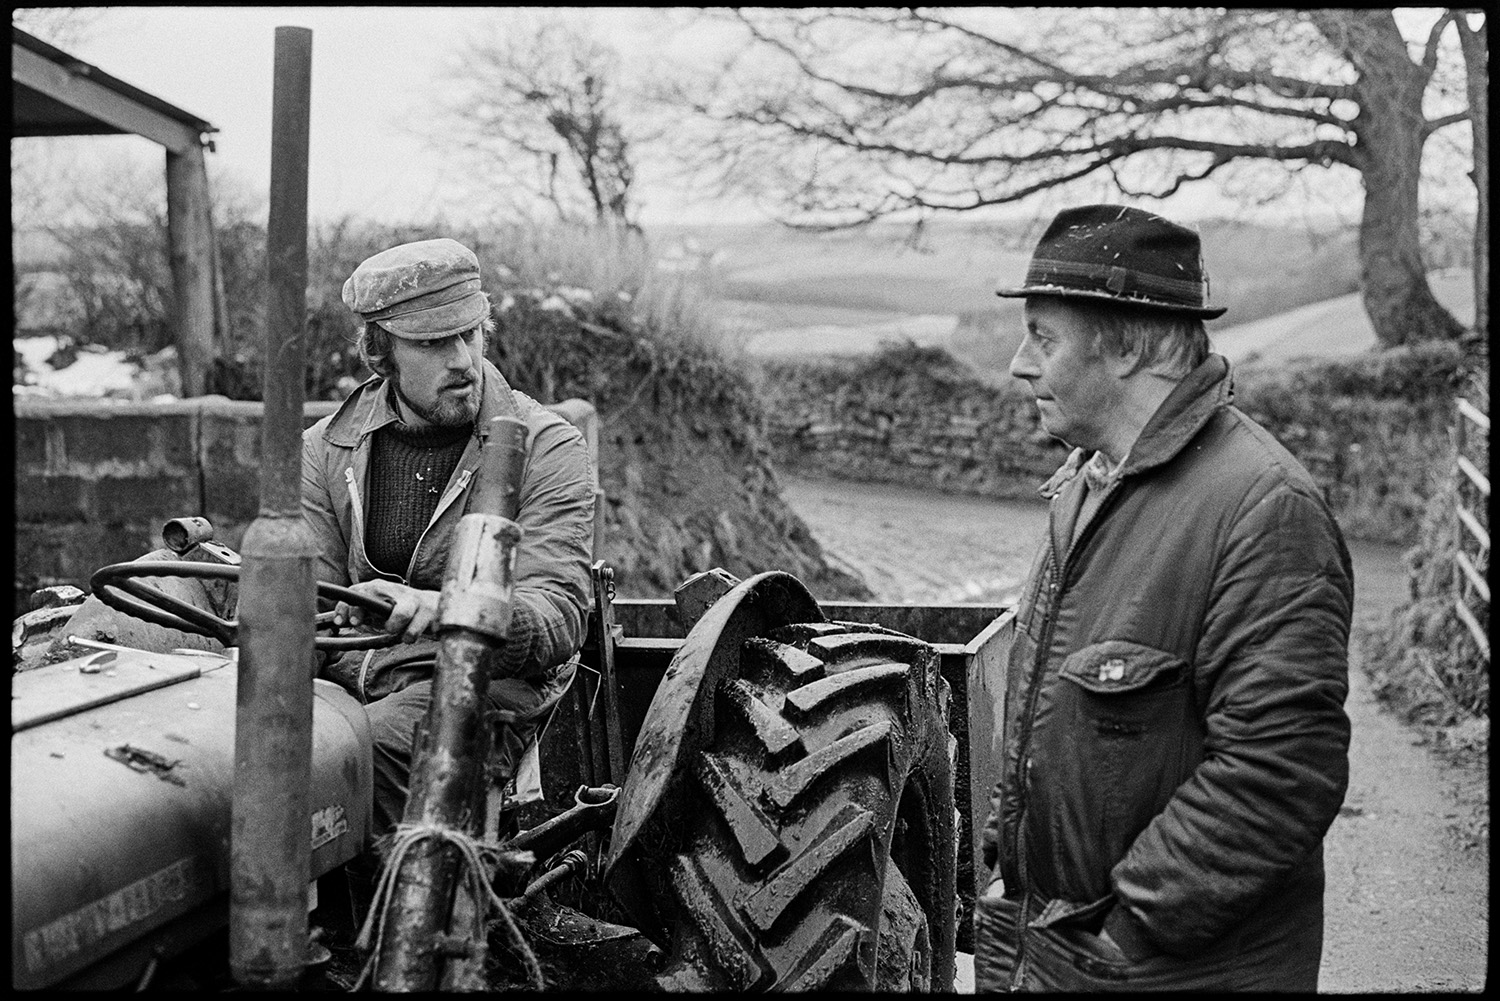 Farmers feeding cows, checking new born calves. 
[Simon Berry, driving a tractor, and talking to Alan Berry in a lane at South Harepath, Beaford.]